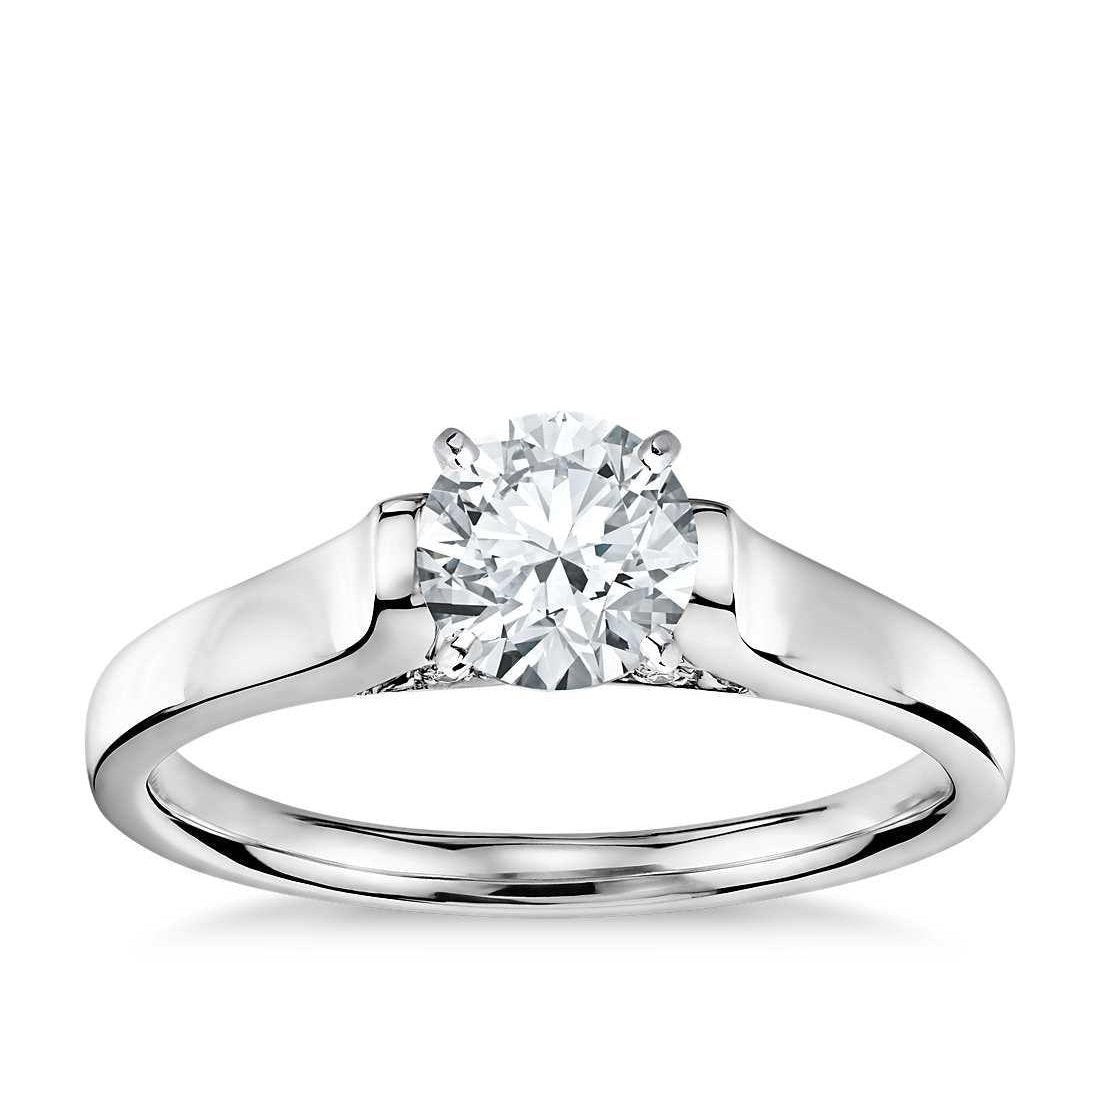 1 Carat Round Solitaire Natural Diamond Engagement Ring Gold Jewelry